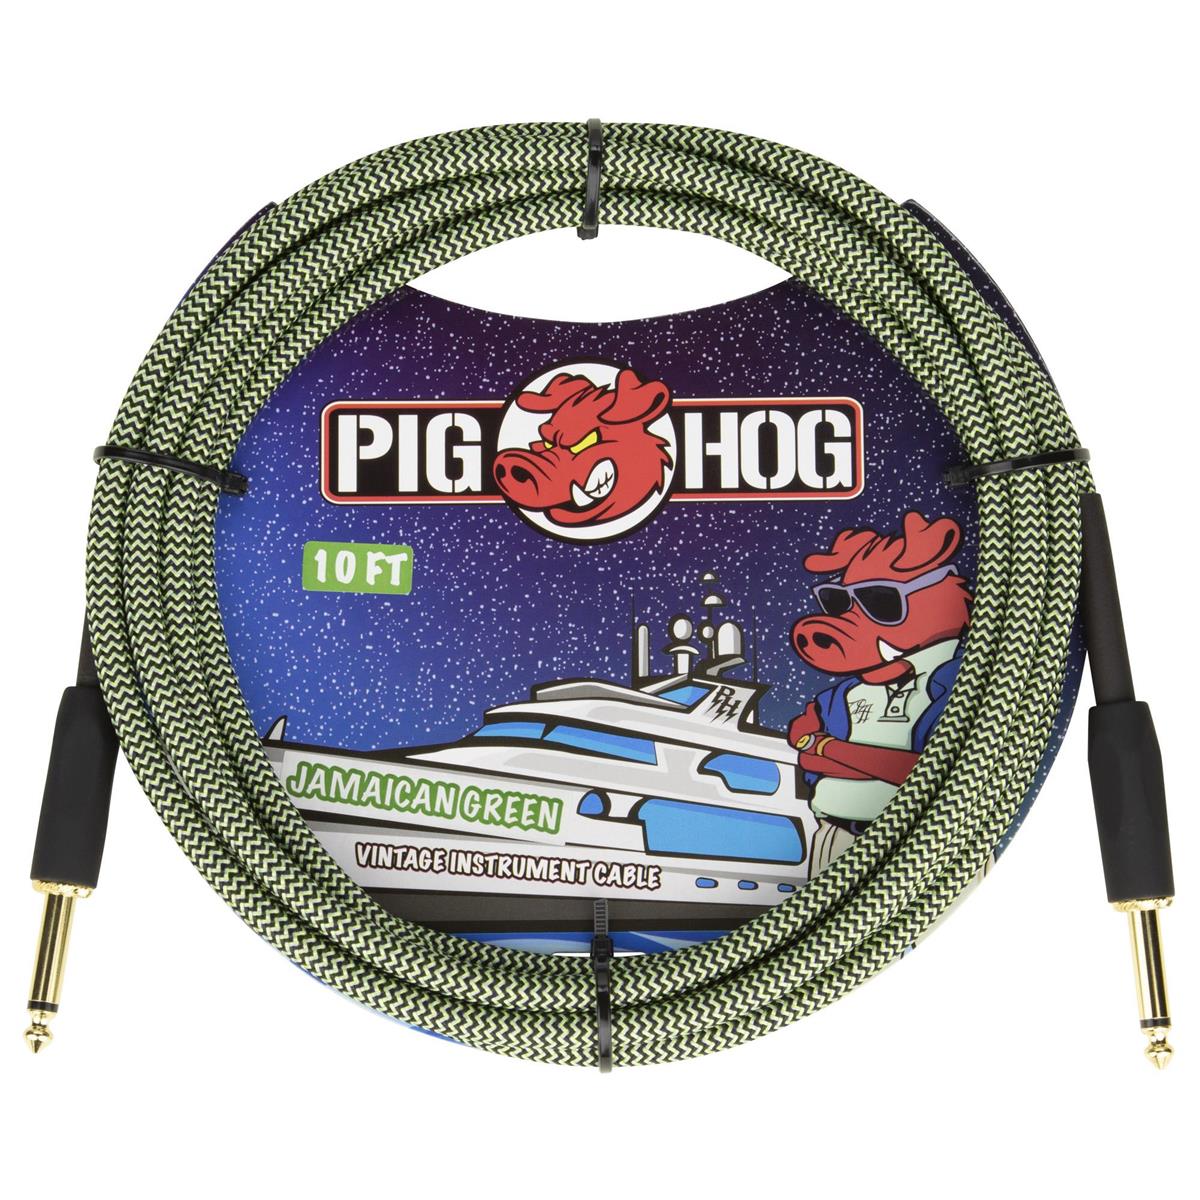 Image of Pig Hog 'Jamaican Green' Instrument Cable